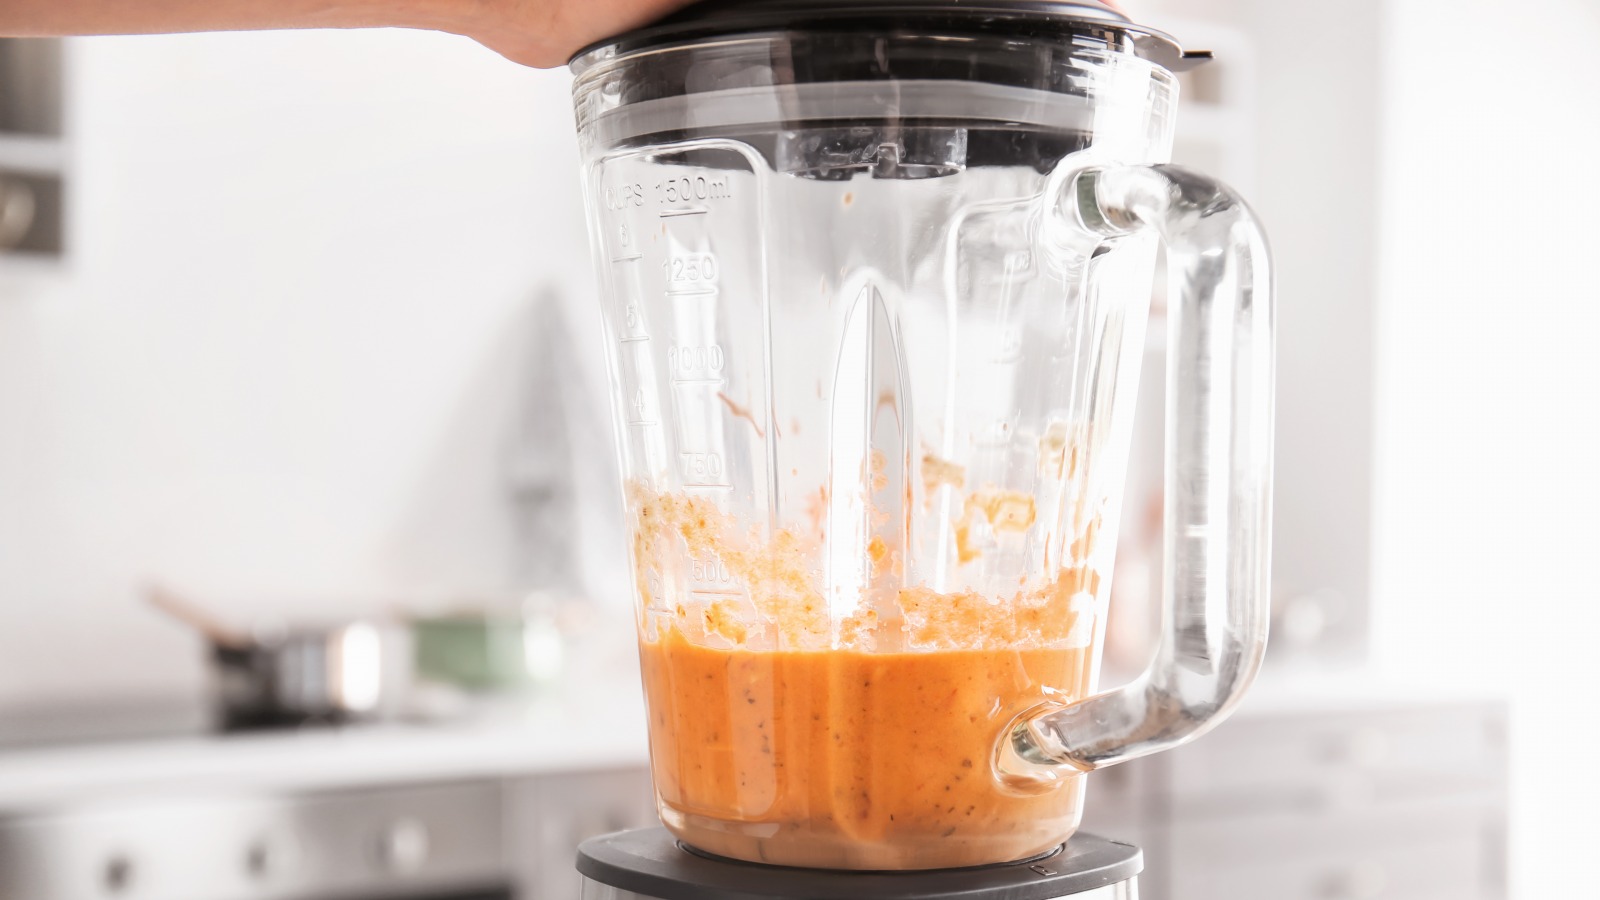 can-you-put-hot-things-in-a-blender